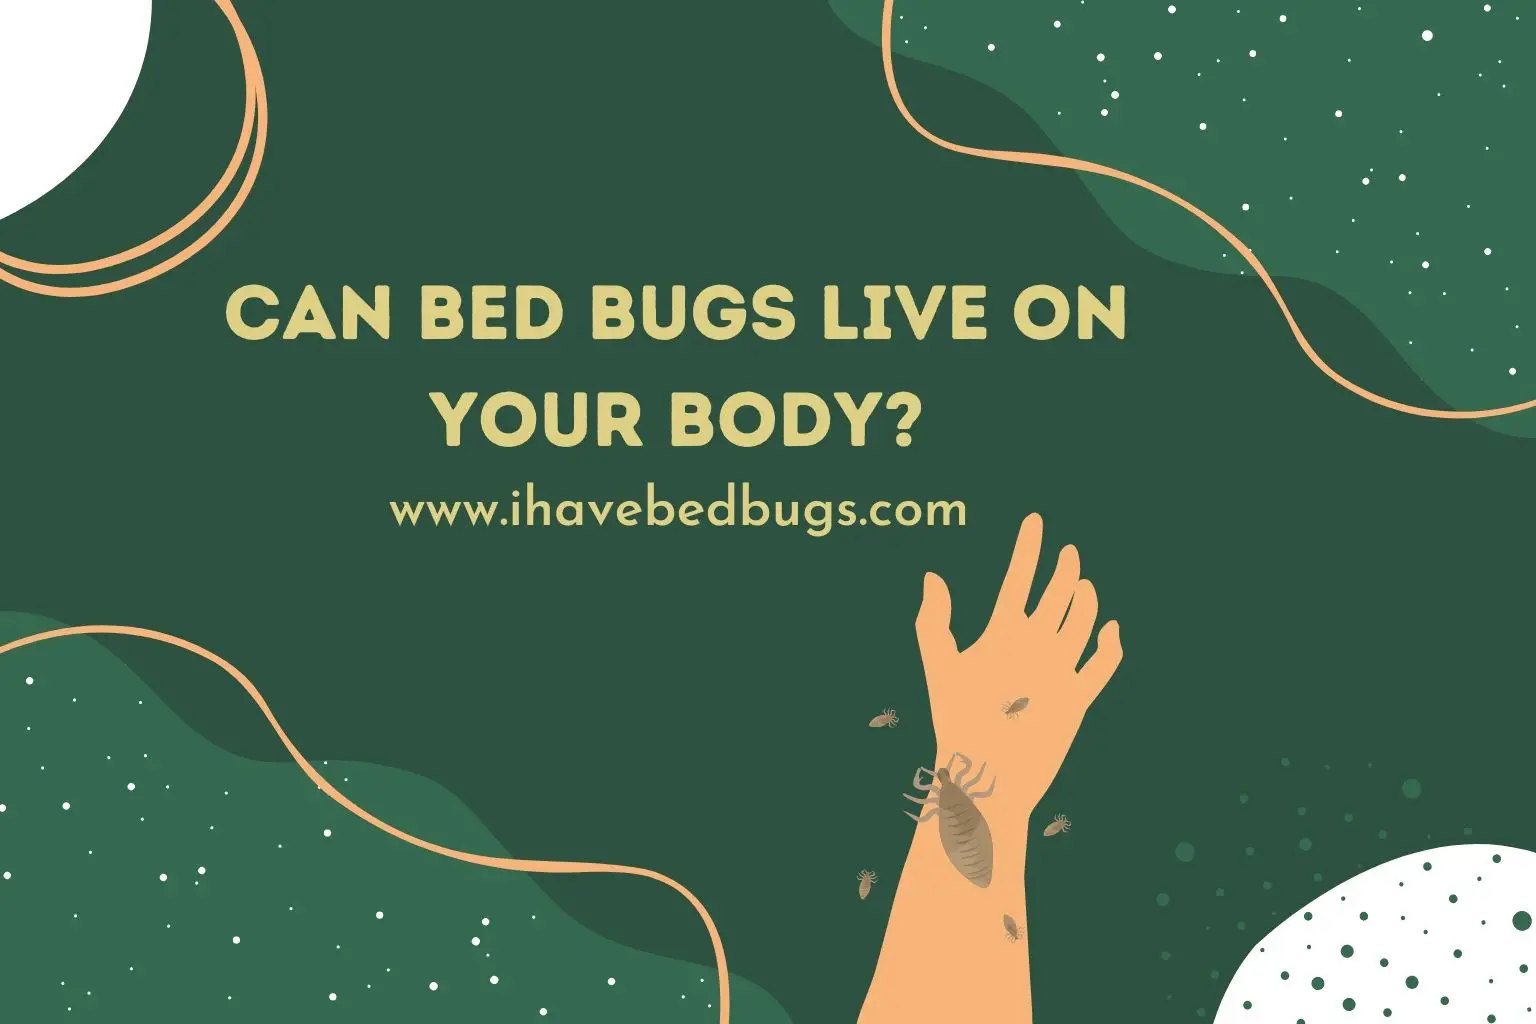 Can bed bugs live on your body